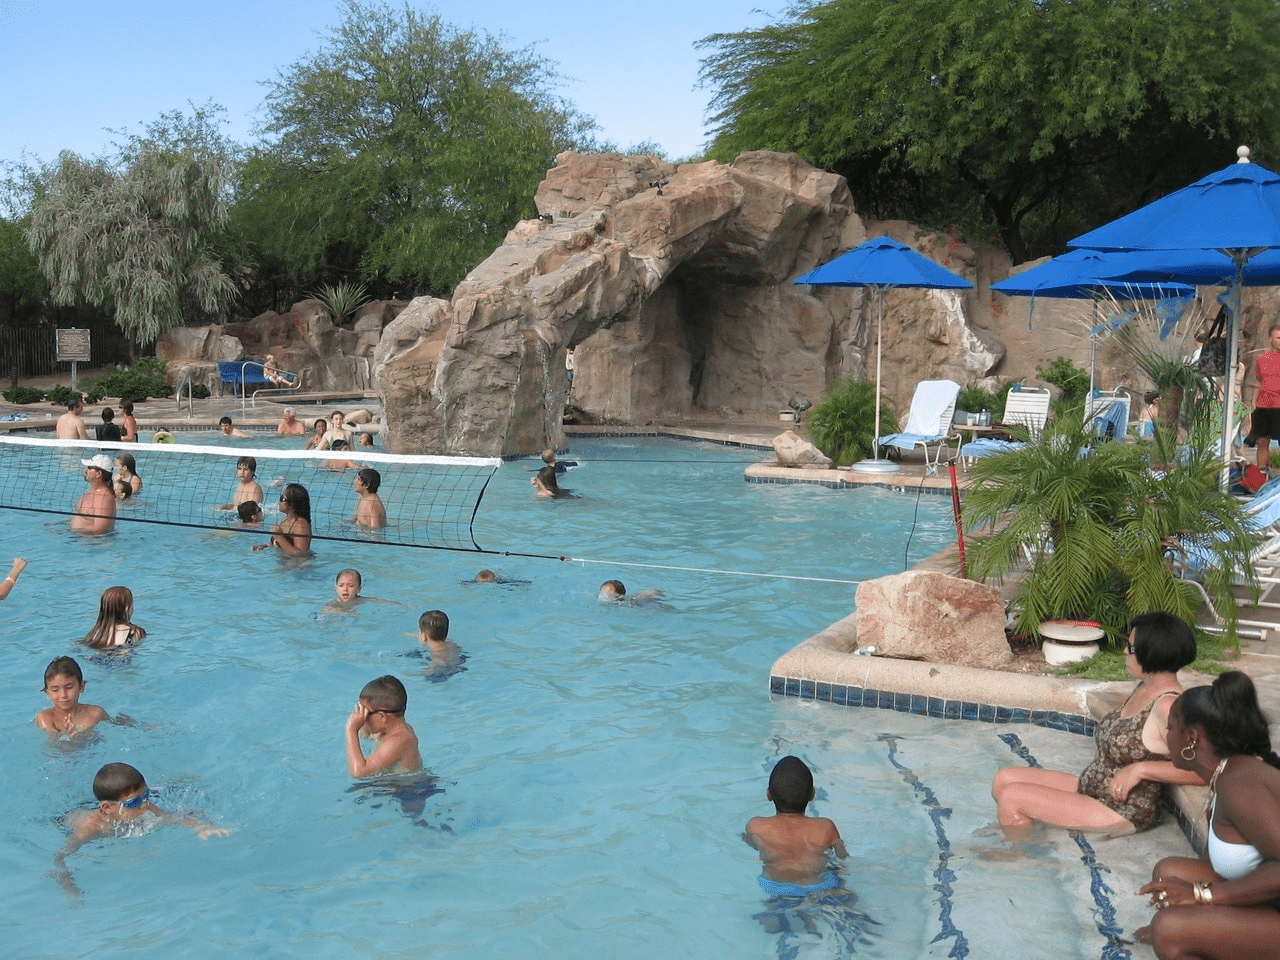 A group of people in the pool at a resort.